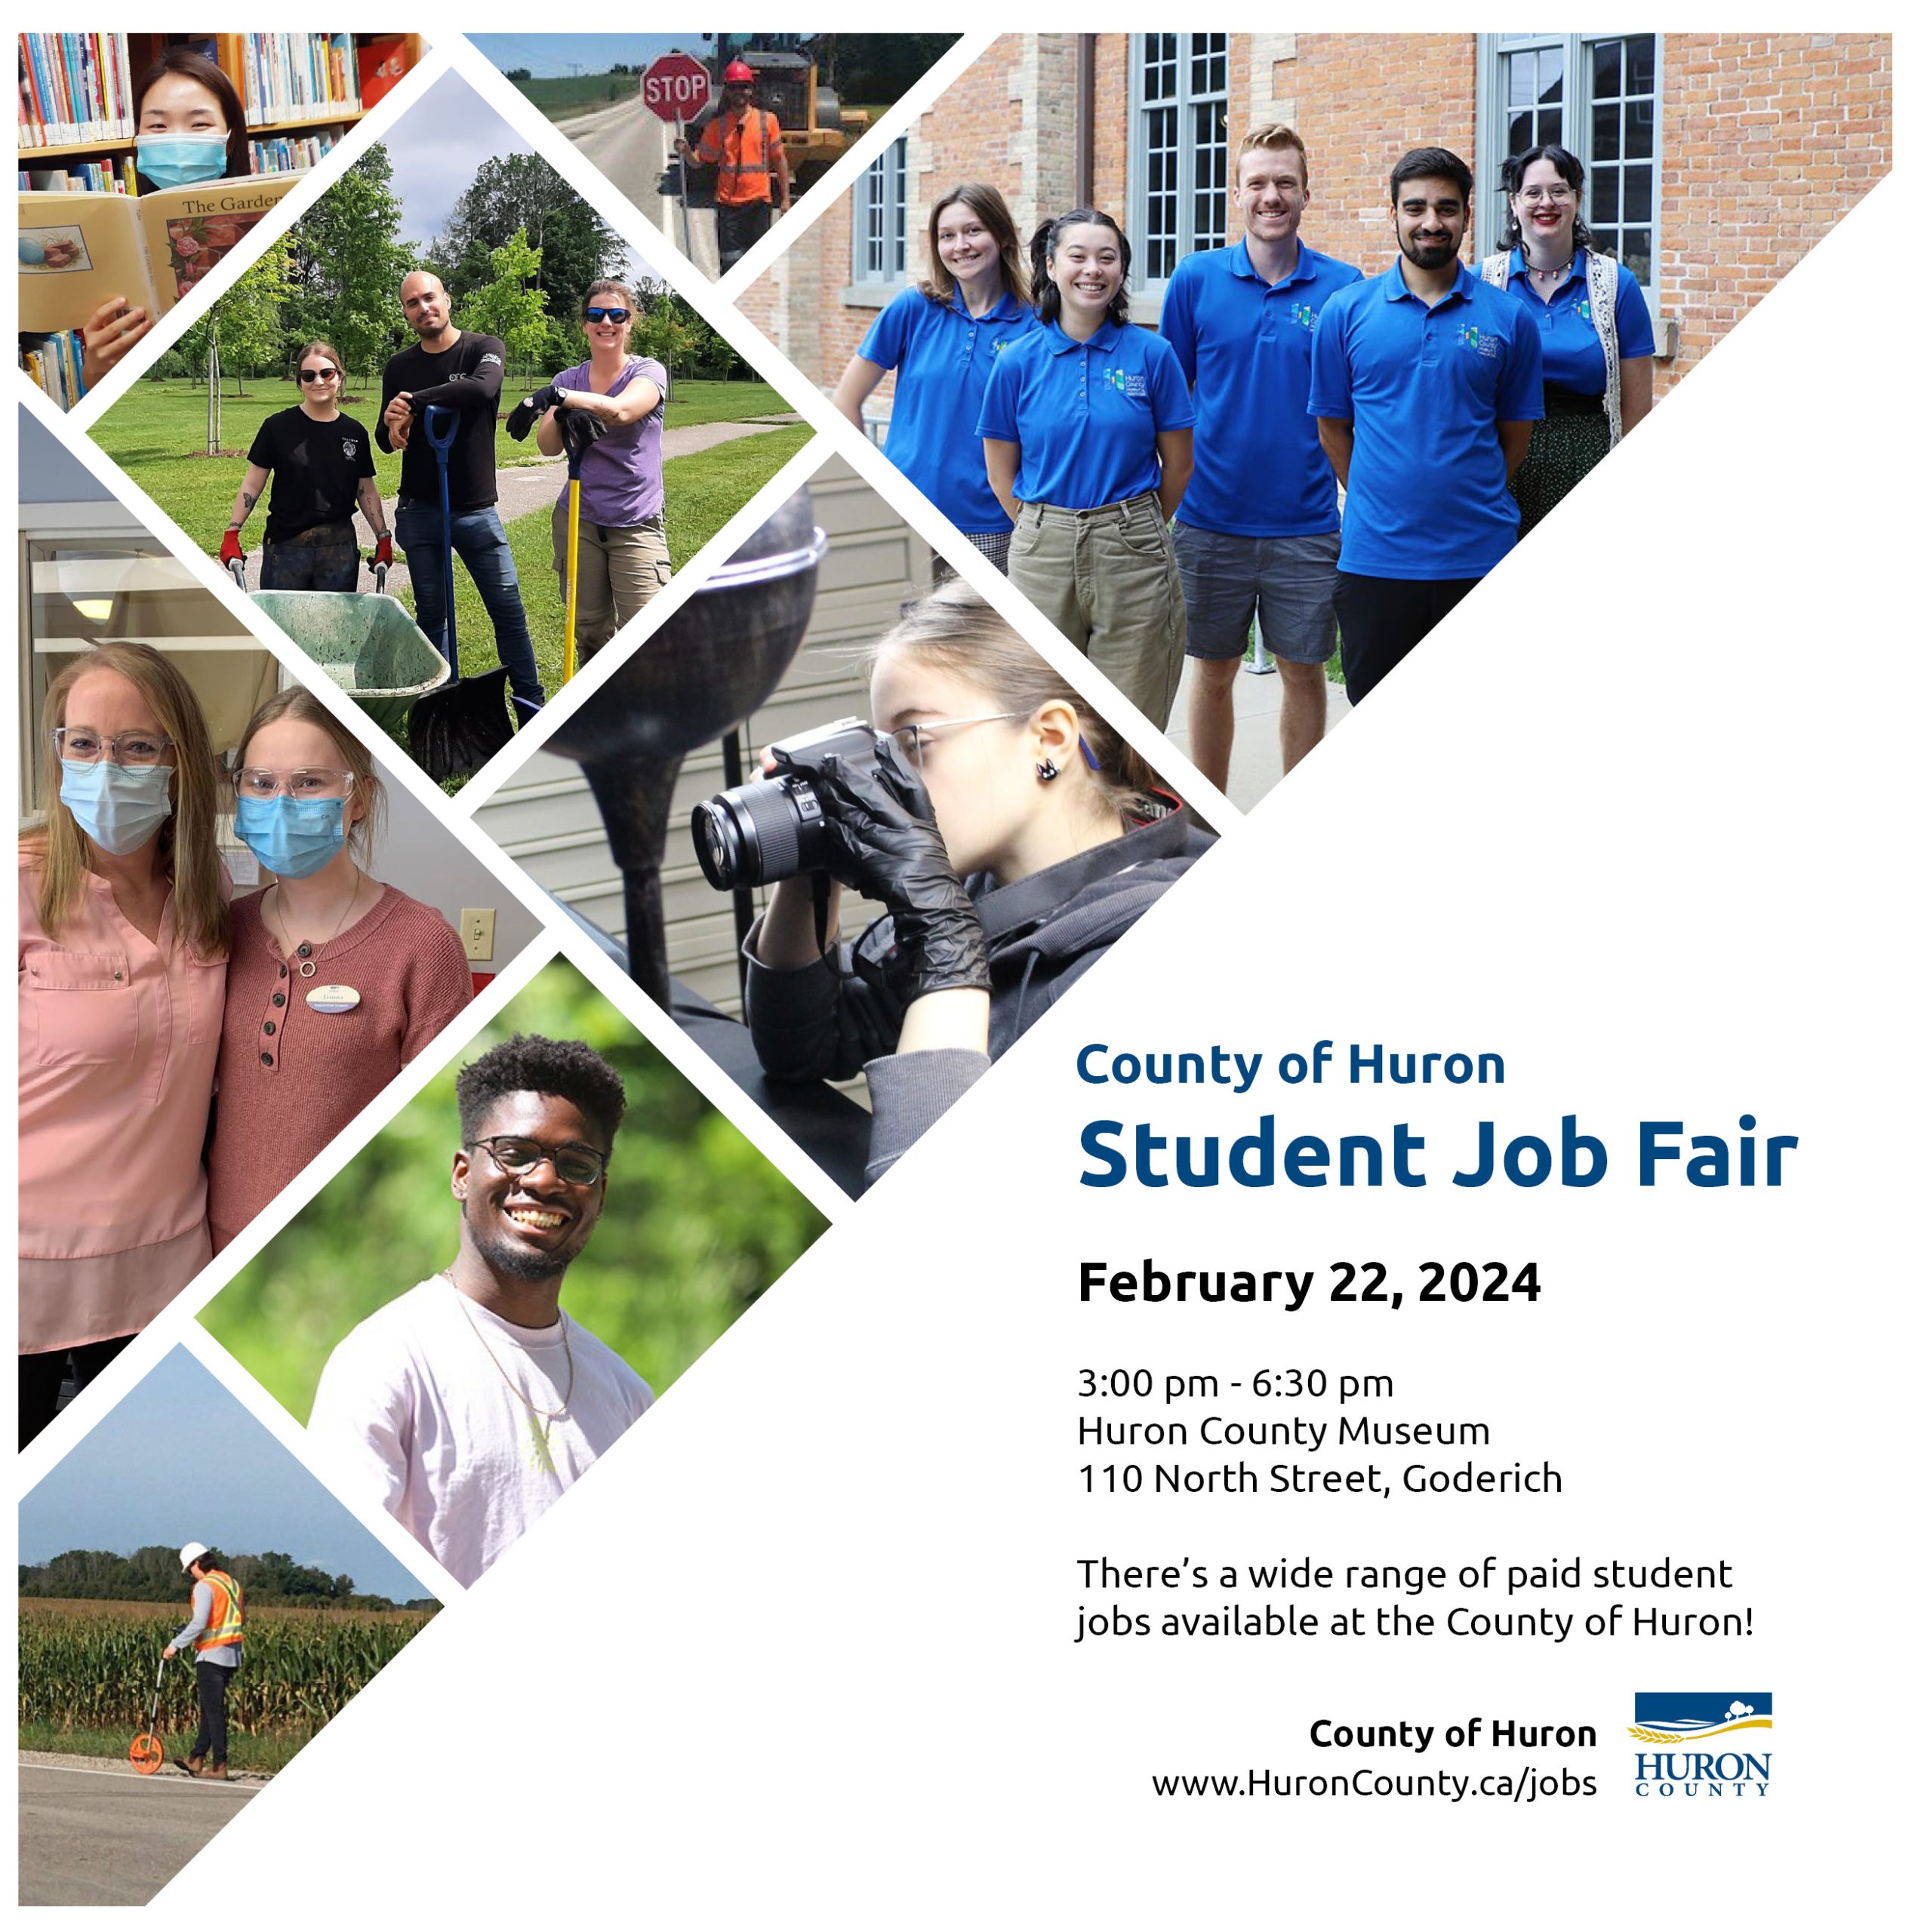 Collection of photos of students working at different County departments with text promoting Student Job Fair at the Museum Feb. 22